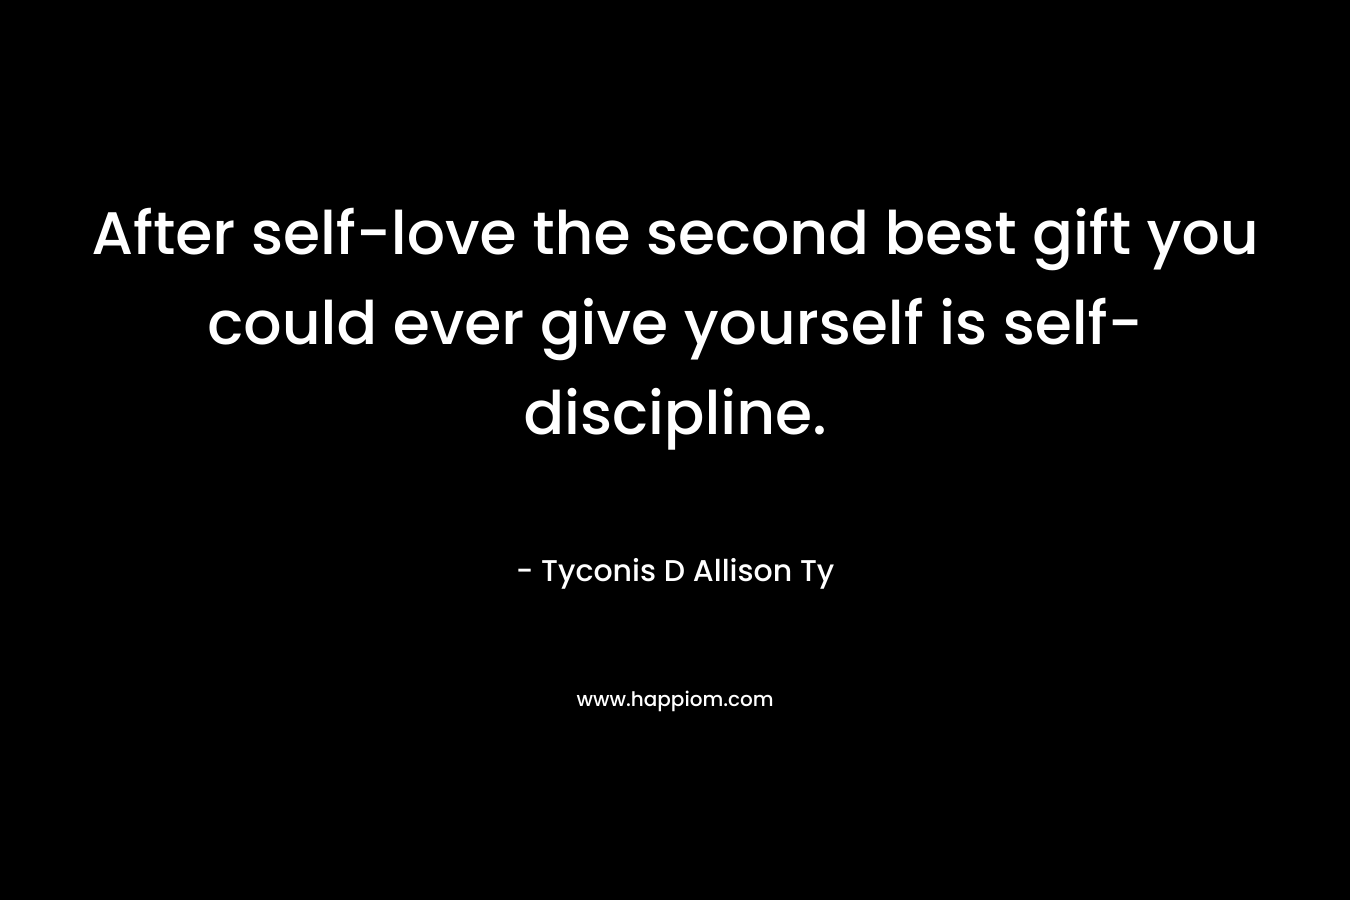 After self-love the second best gift you could ever give yourself is self-discipline.